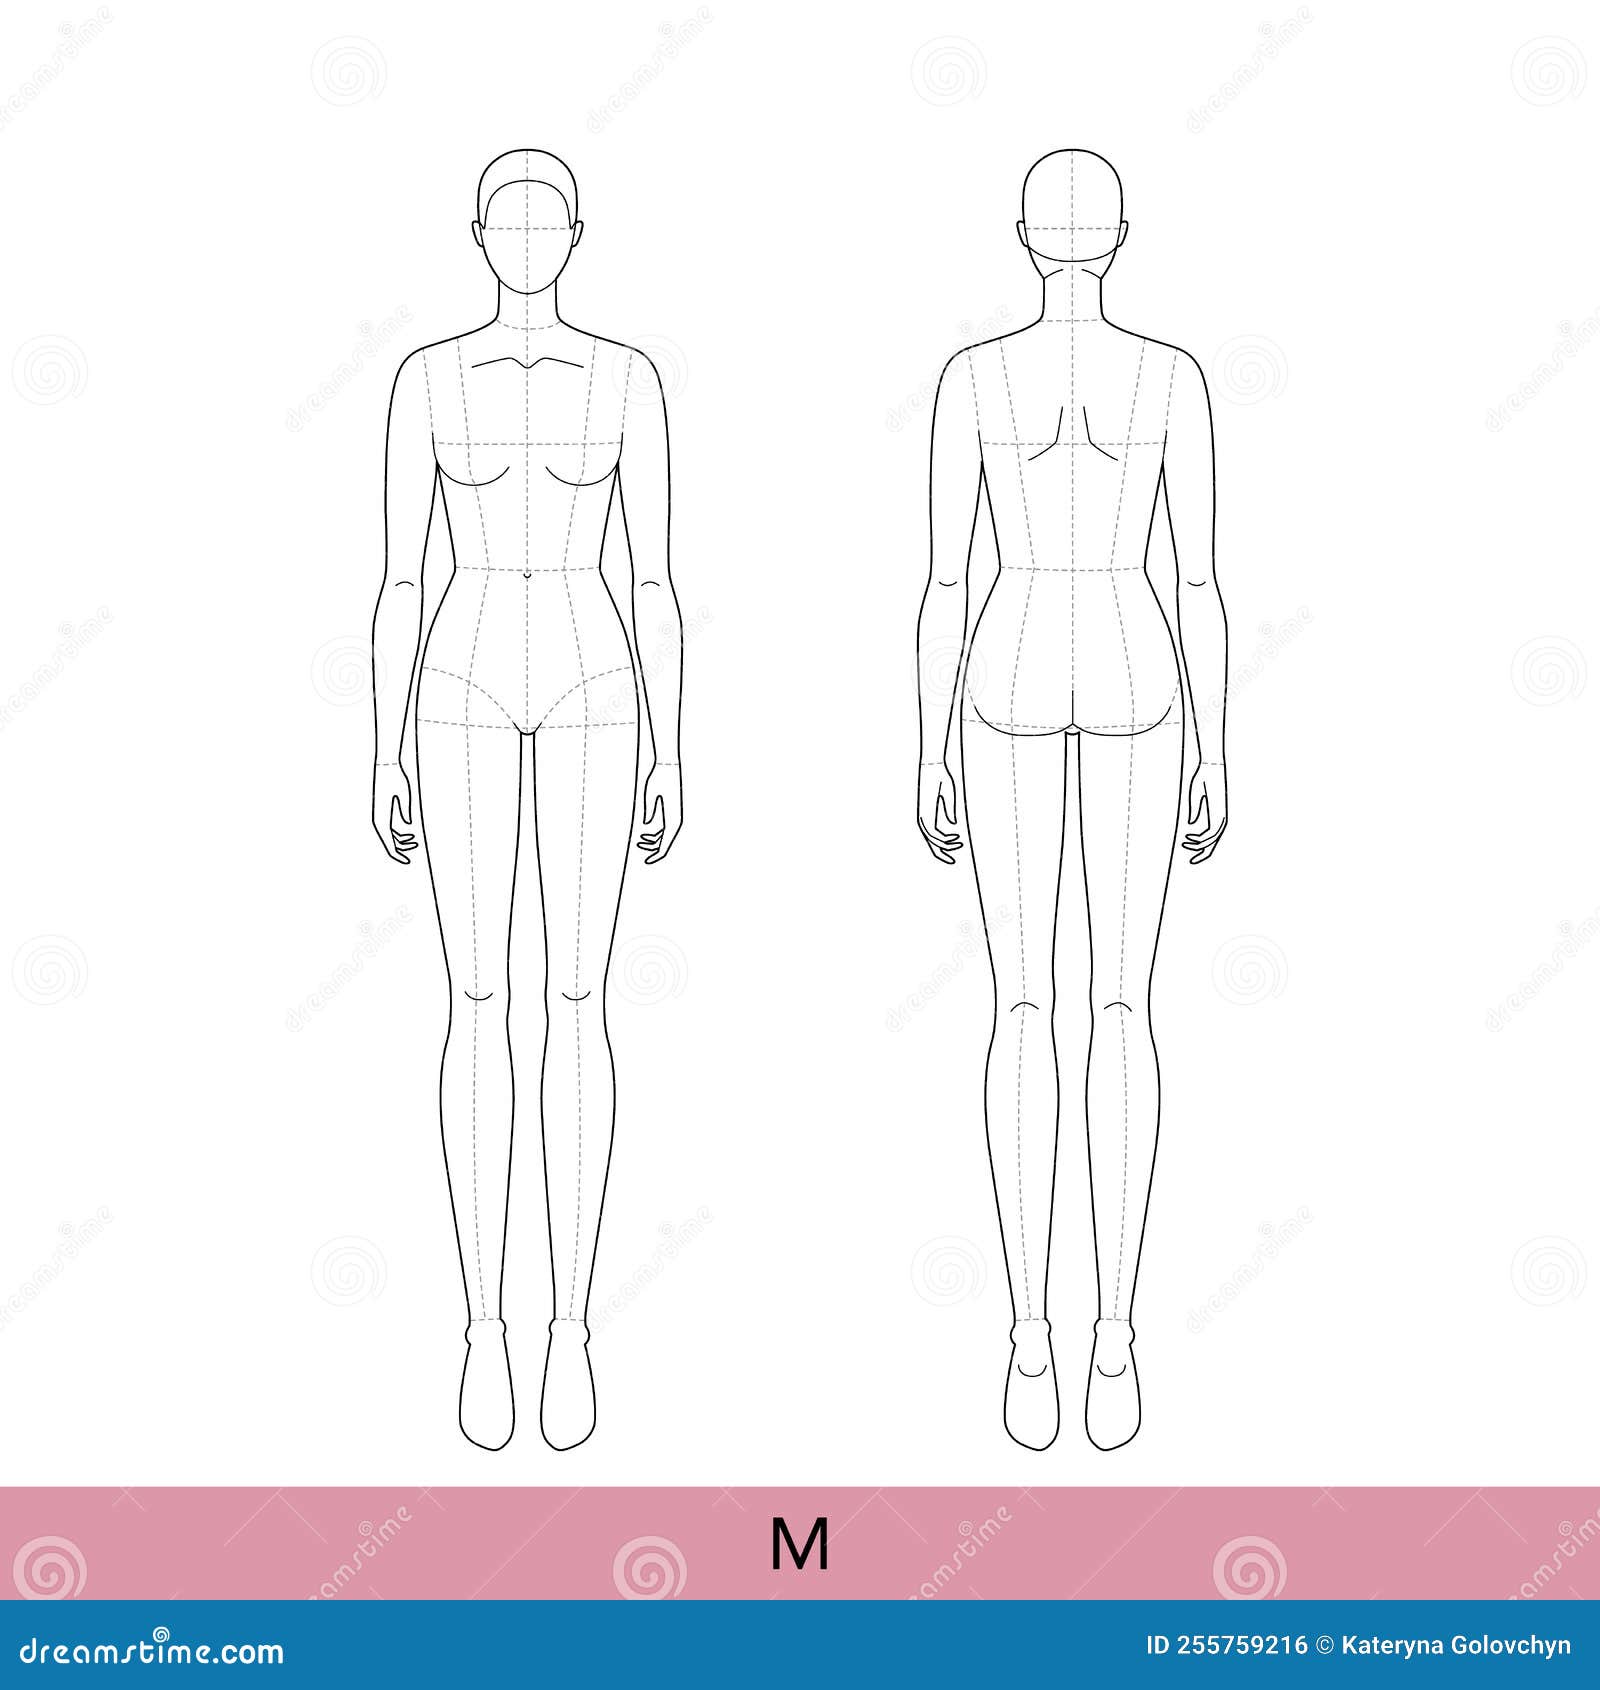 m size women fashion template 9 nine head croquis lady model with main lines skinny body figure front back view. 